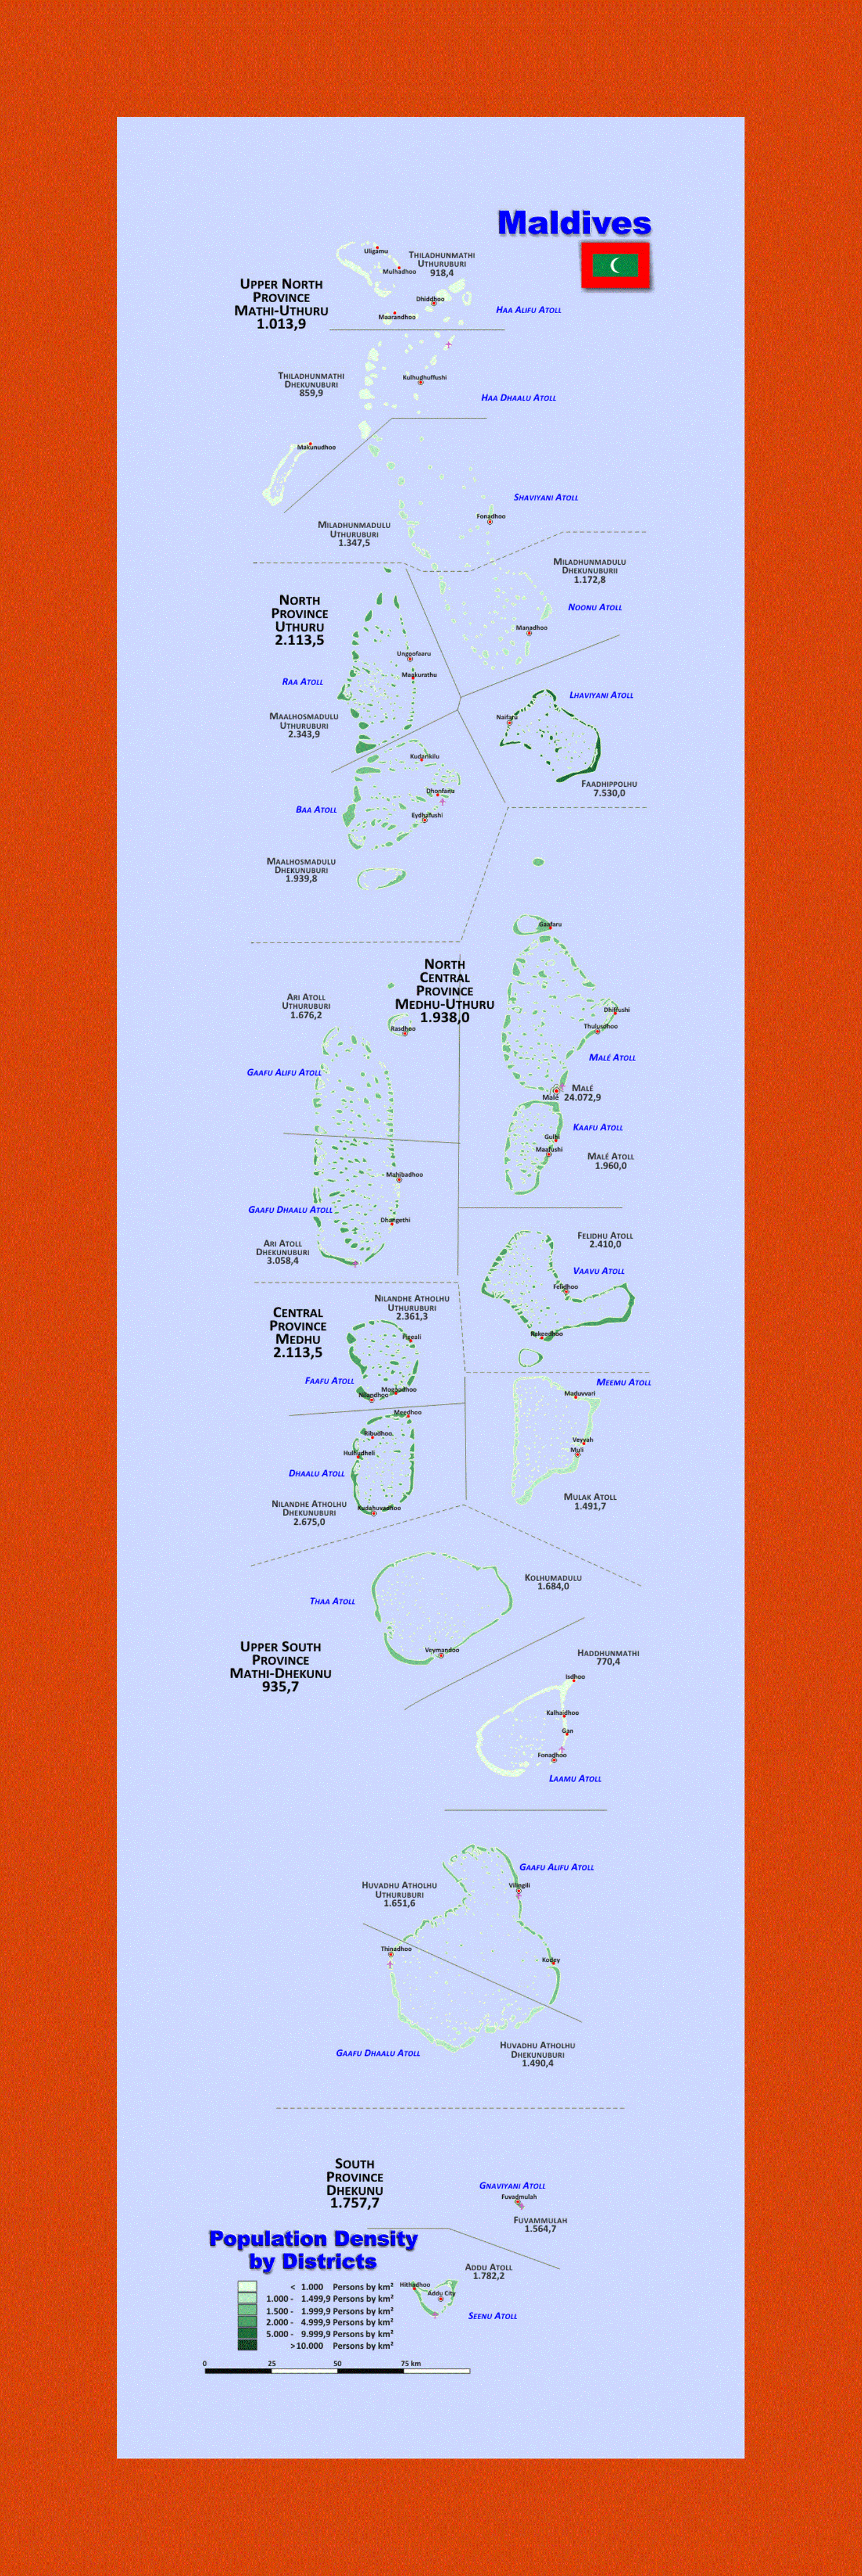 Population density by districts map of Maldives